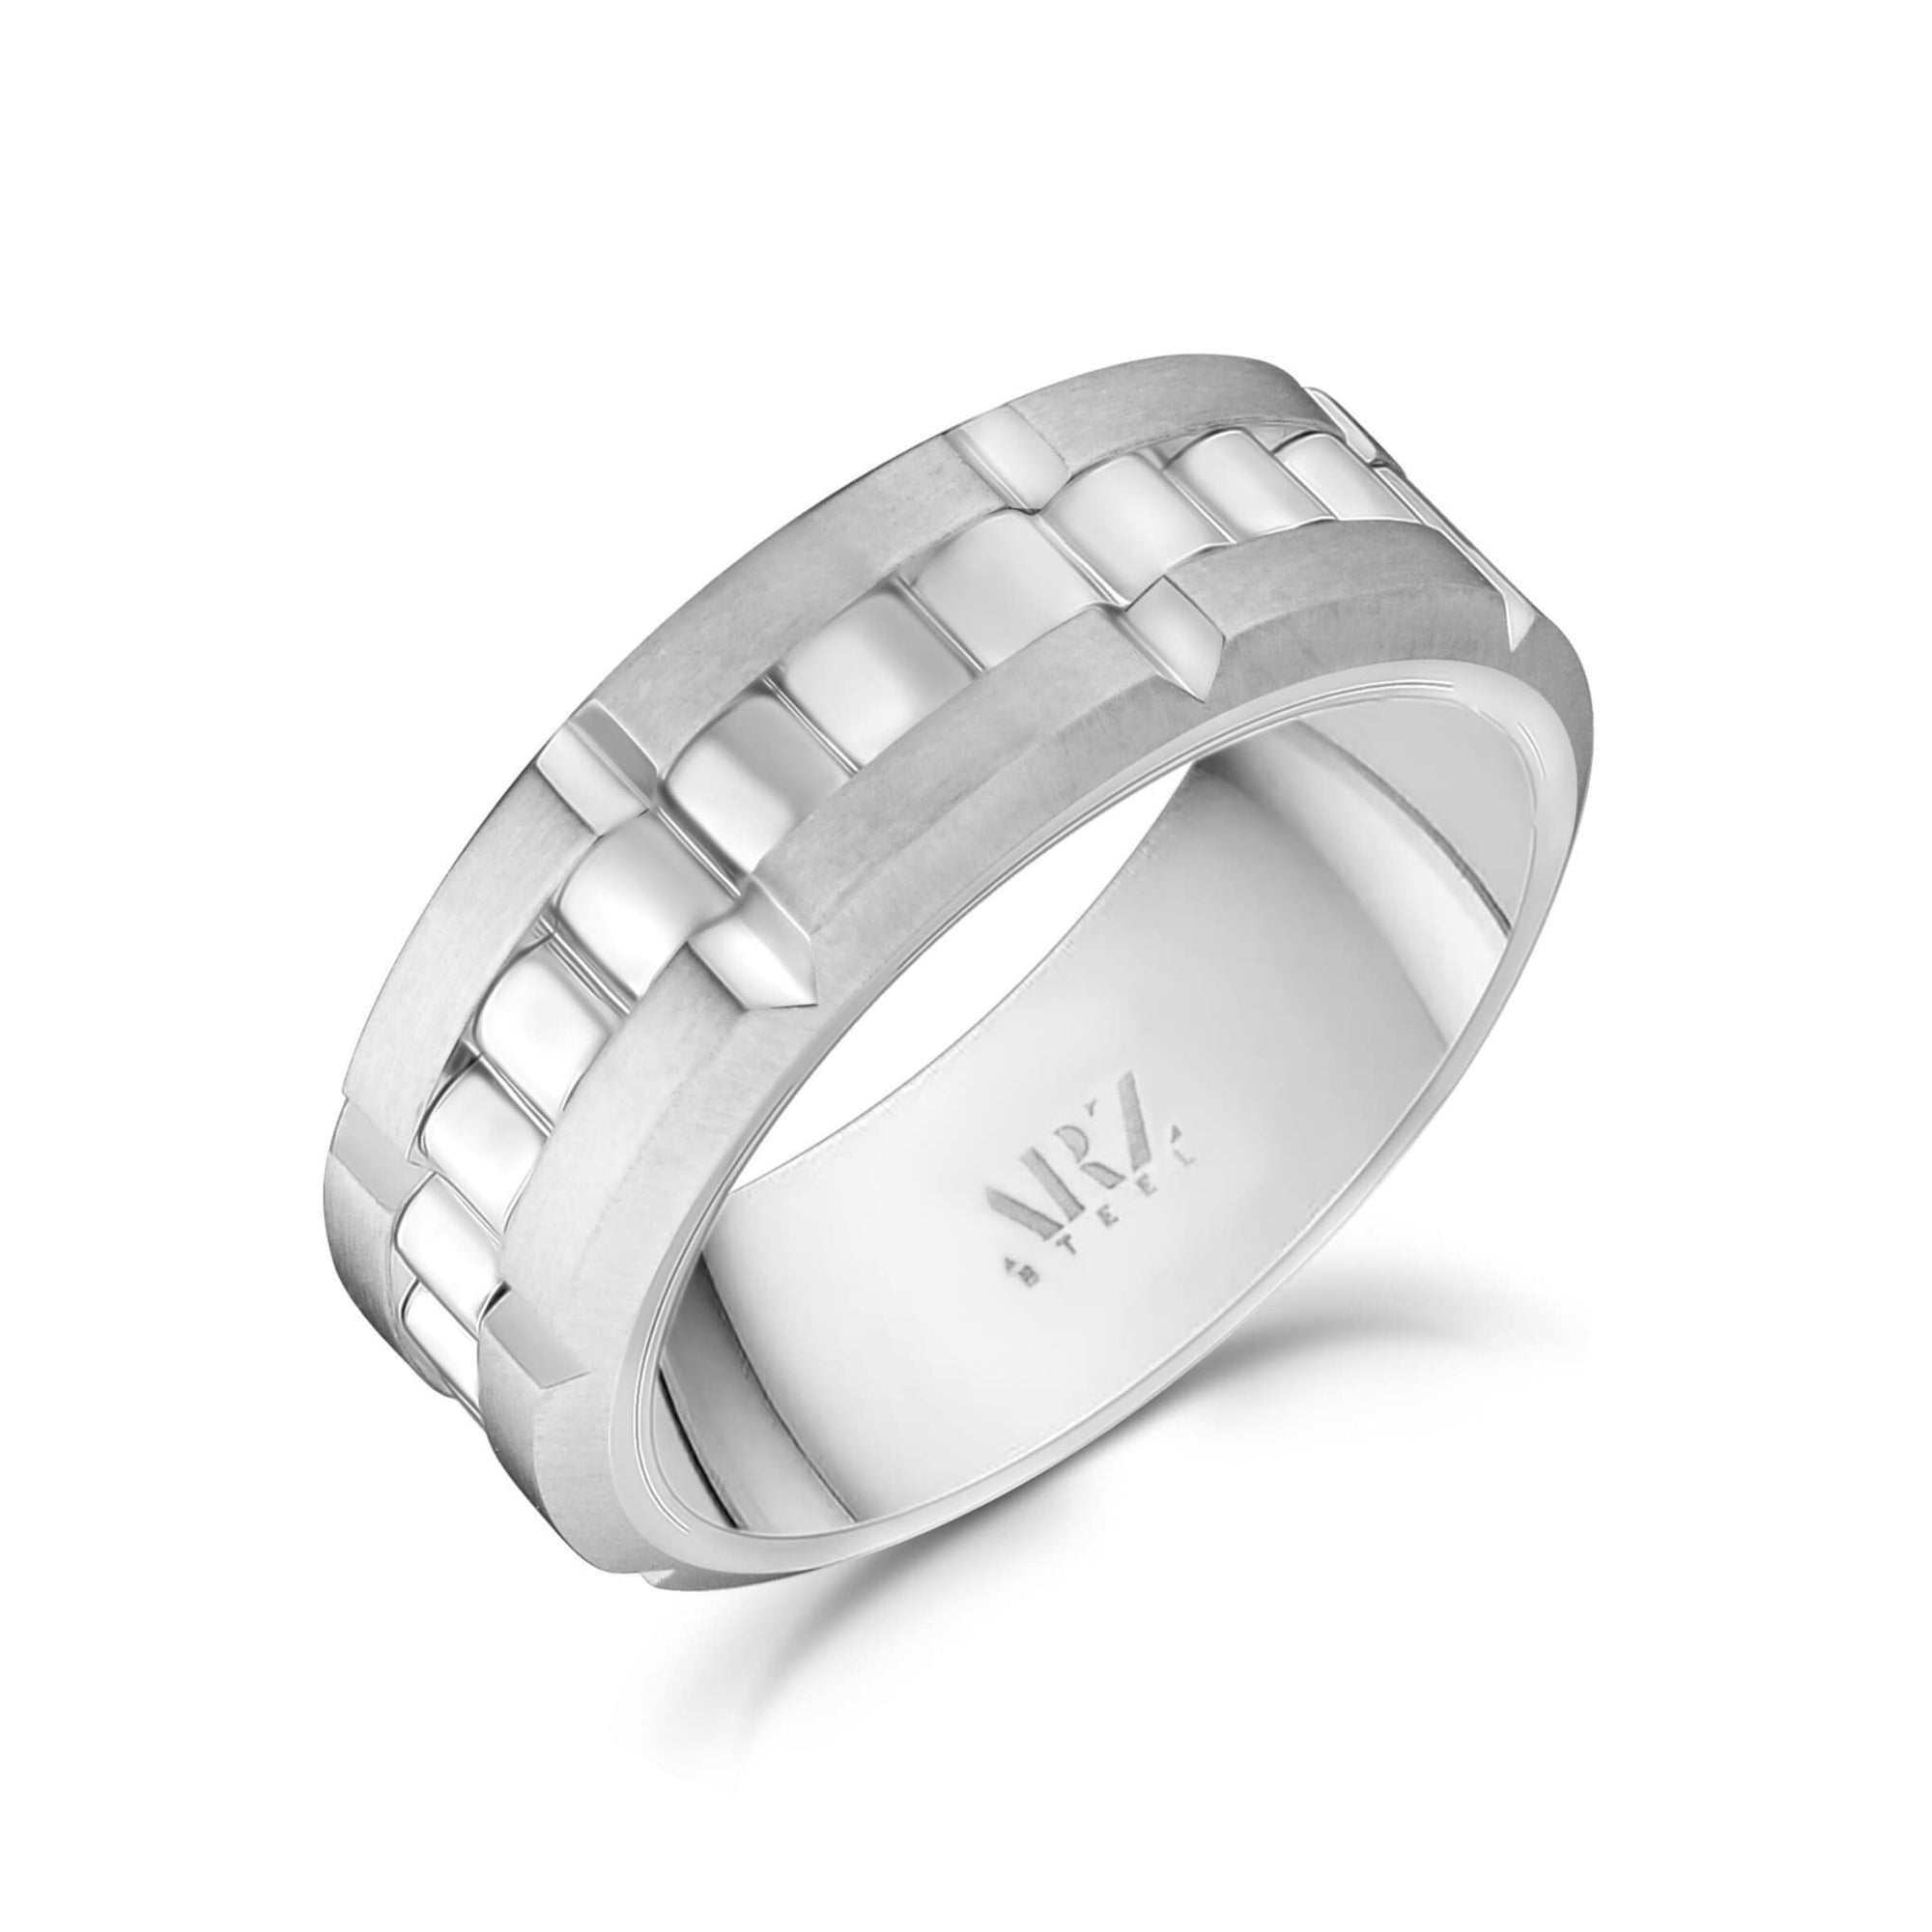 8mm Steel Spinner Band Ring at Arman's Jewellers